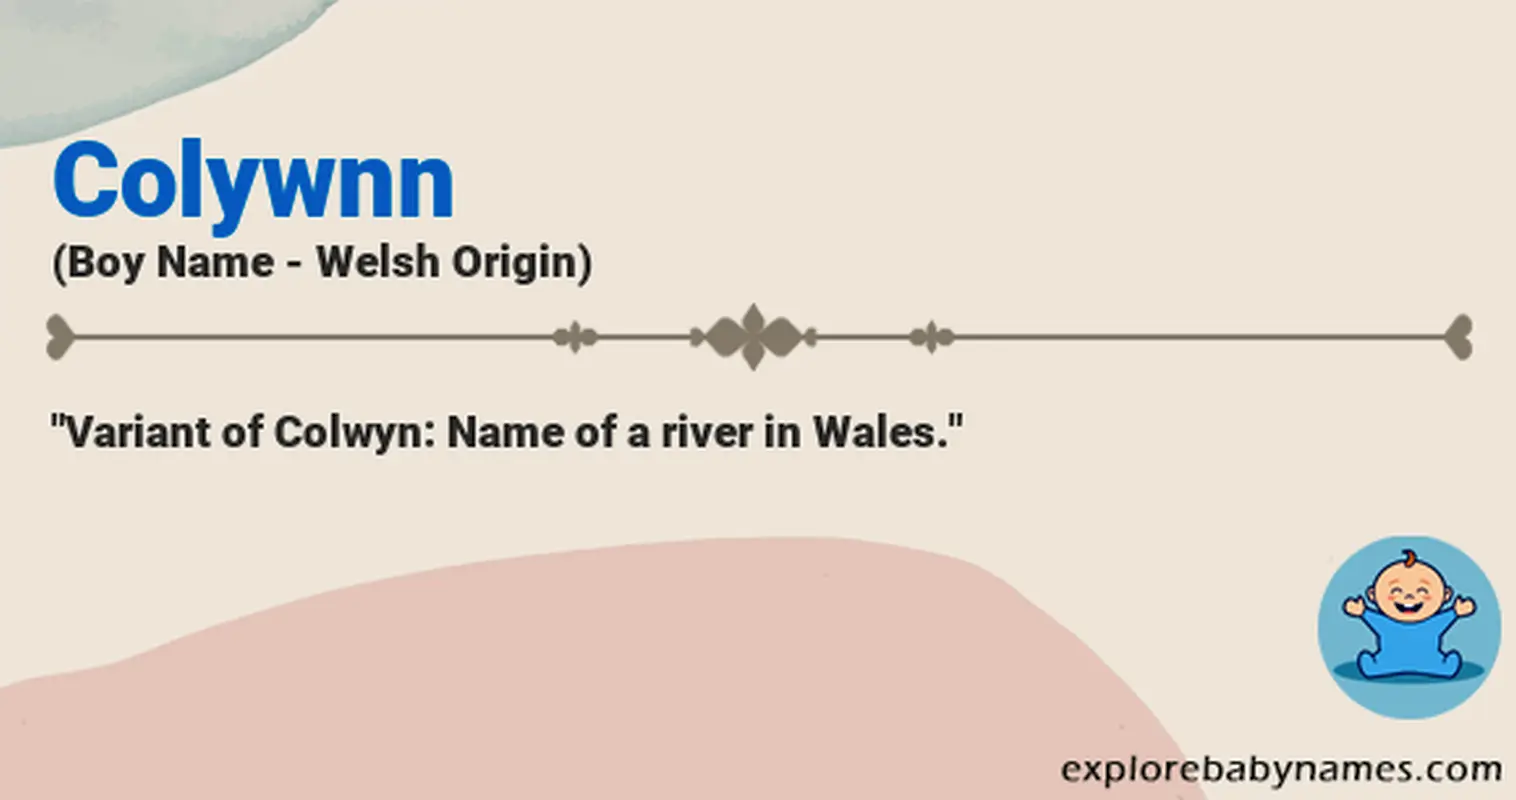 Meaning of Colywnn